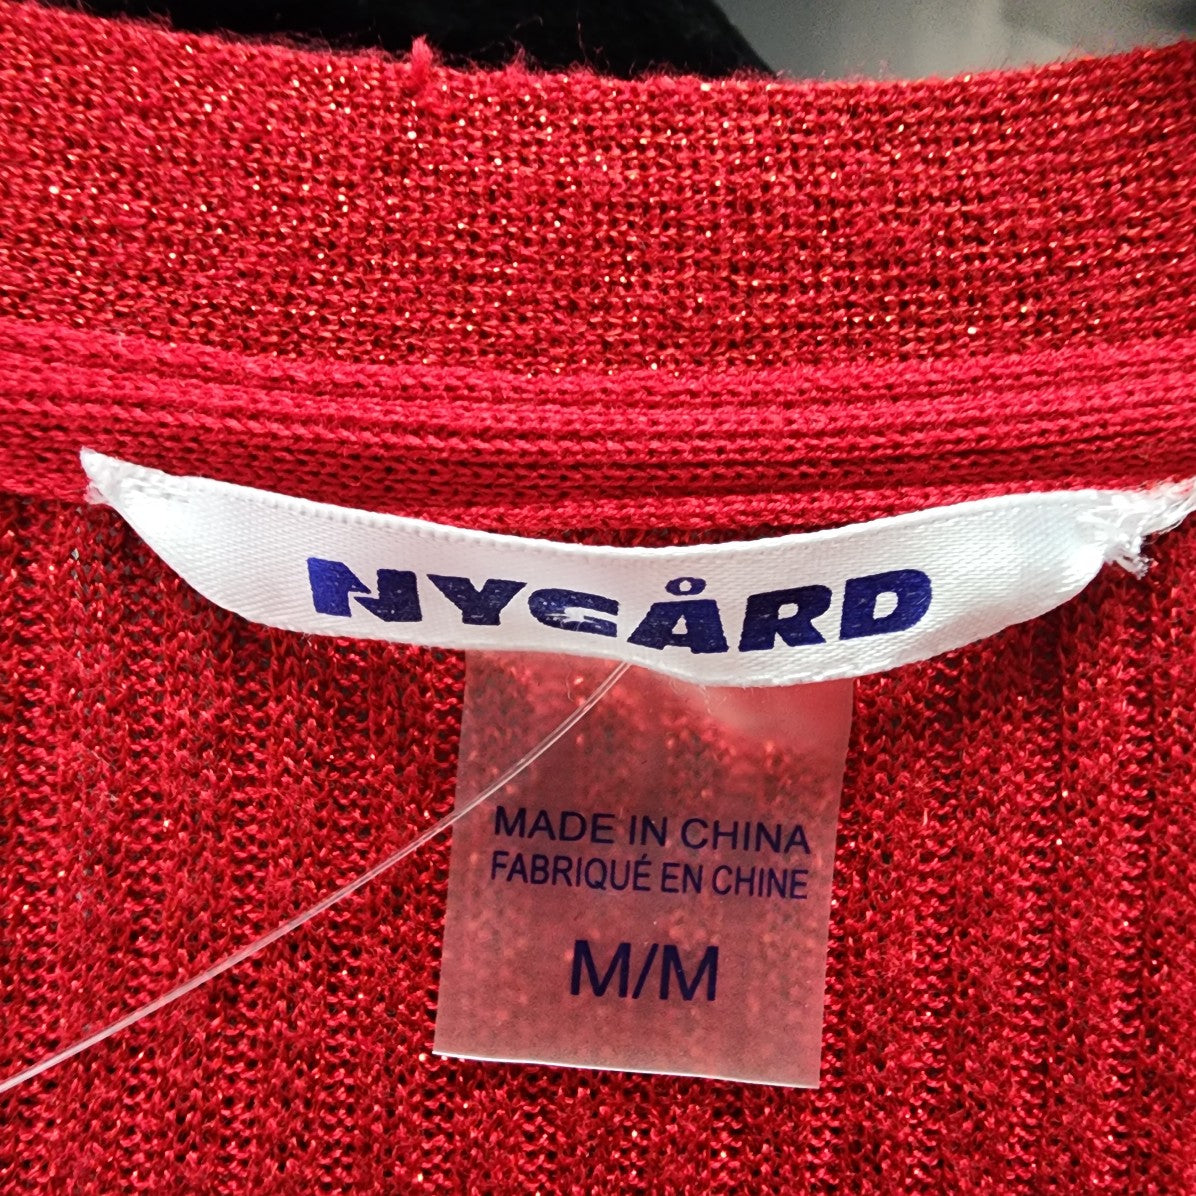 Nygard Sparkle Red Knit Long Cardigan Size M